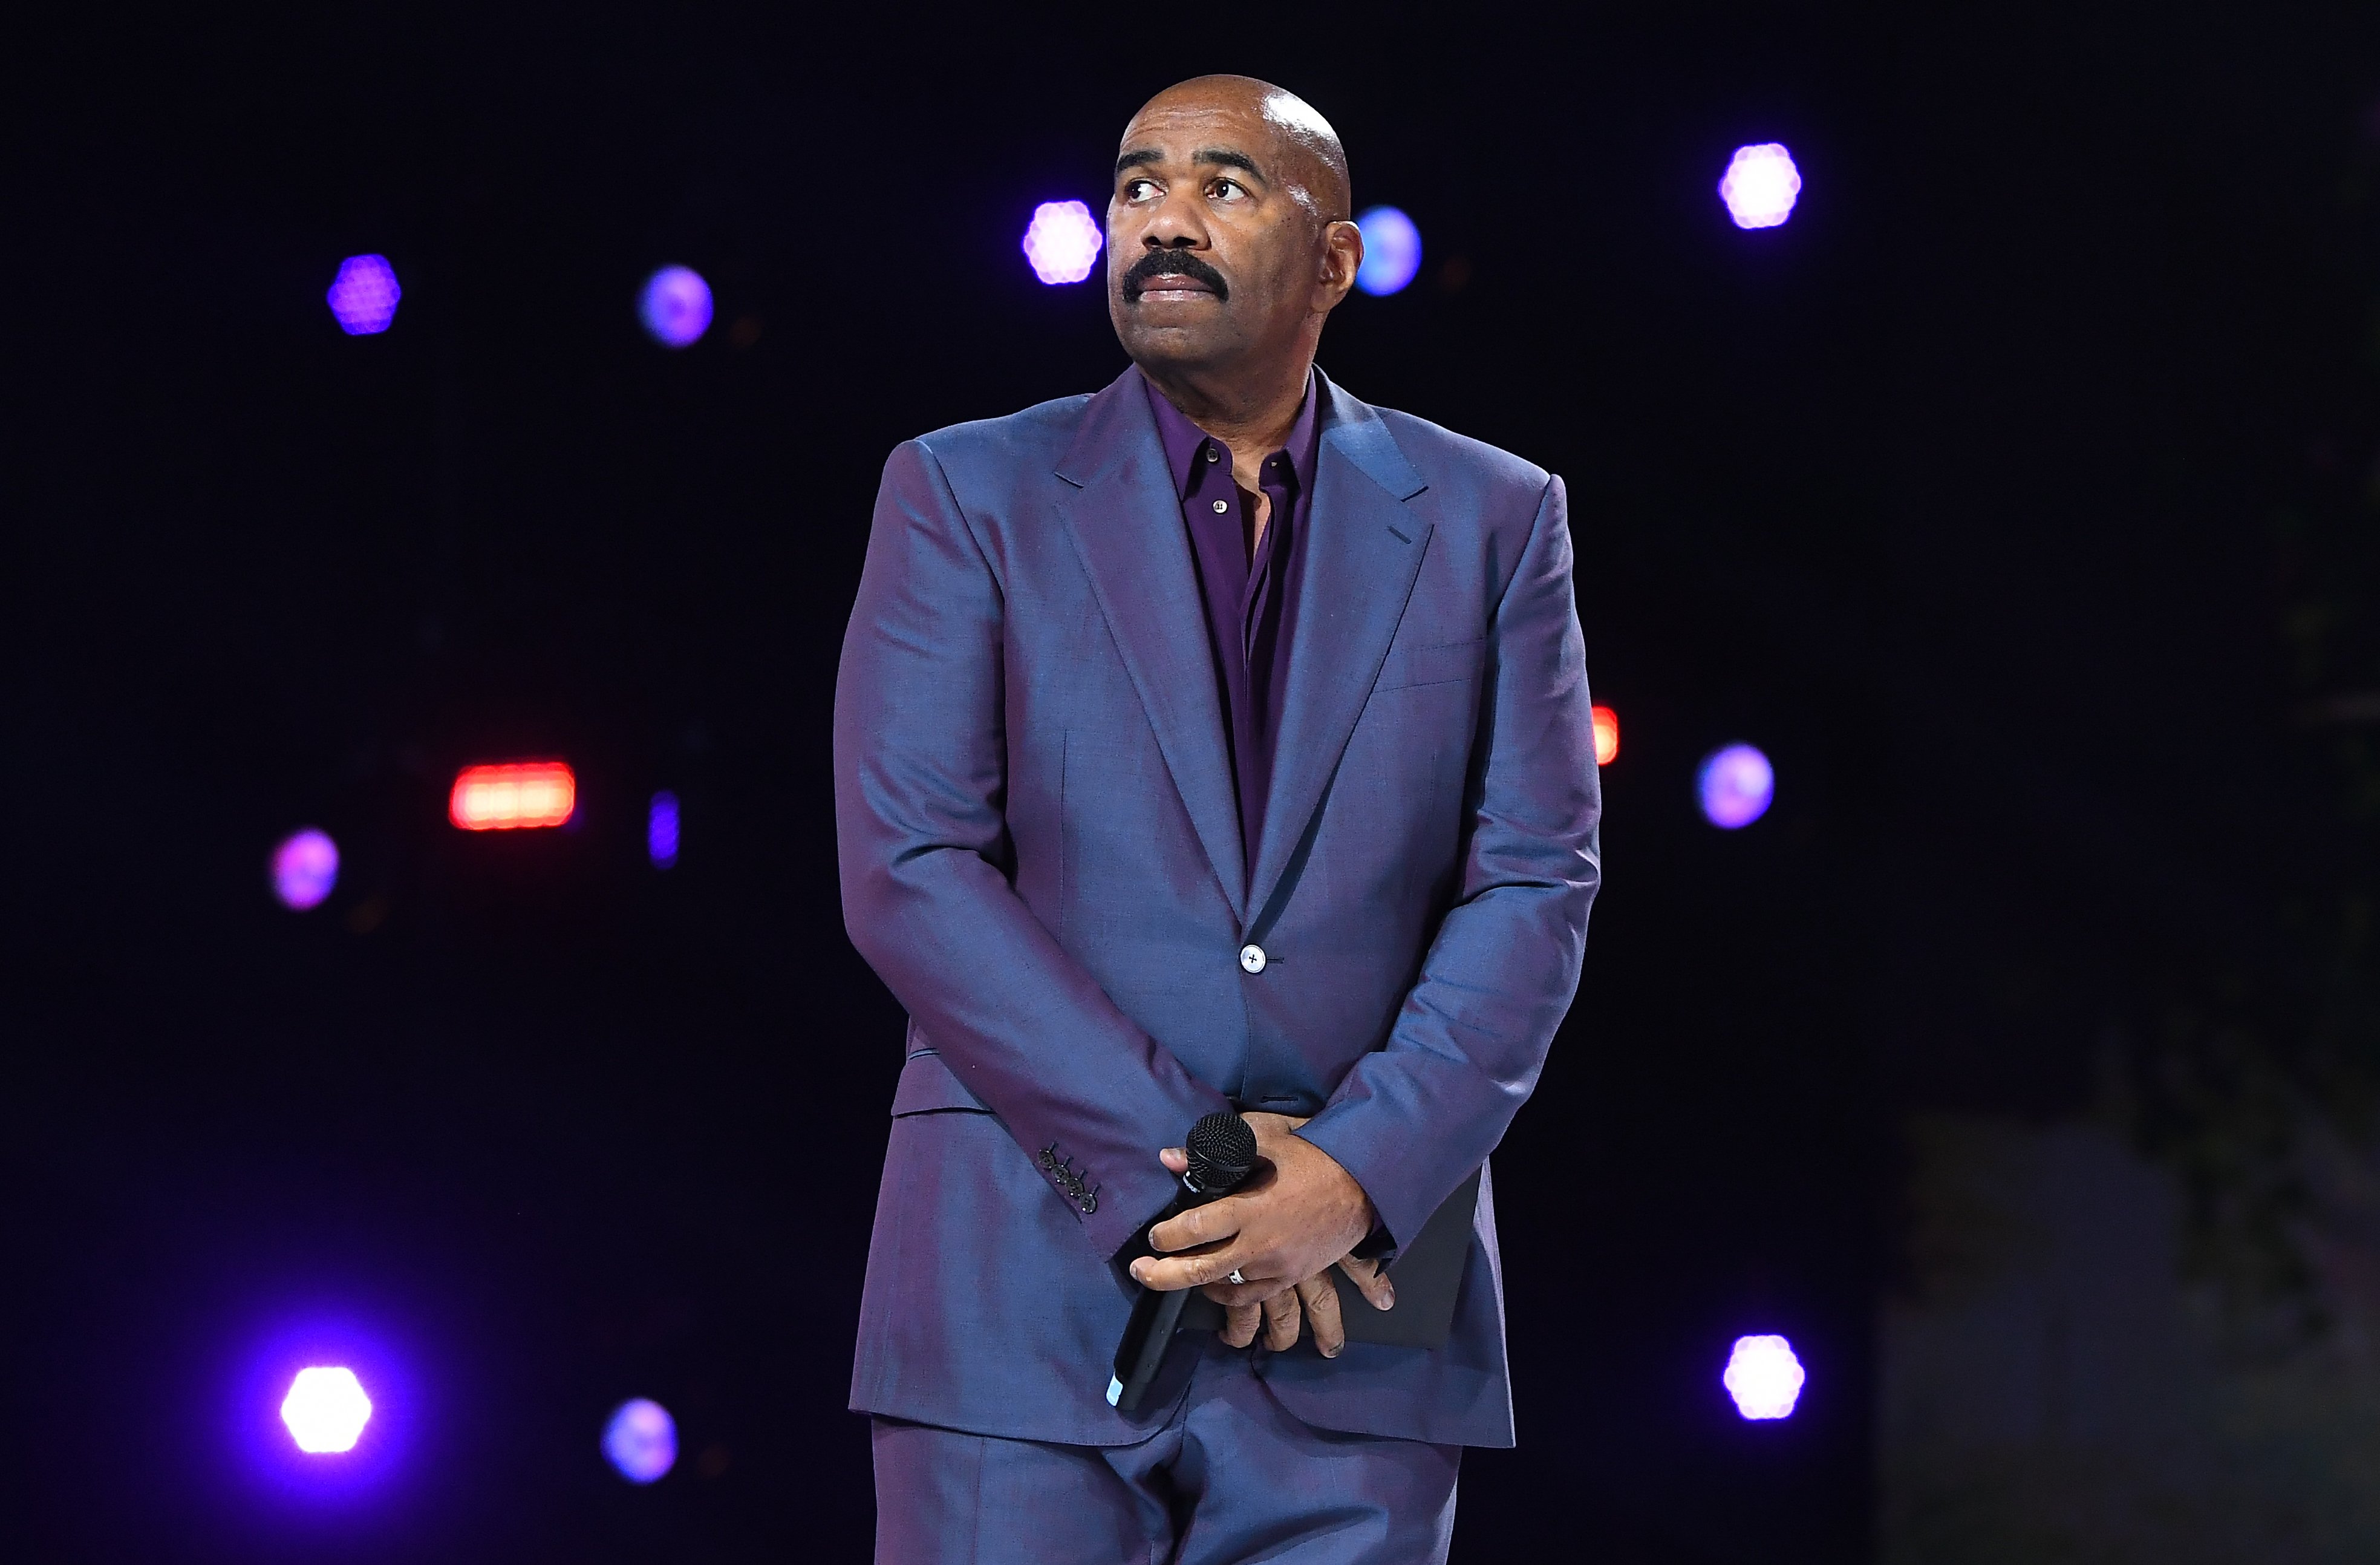 Steve Harvey onstage during the Beloved Benefit at Mercedes-Benz Stadium in Atlanta, Georgia. | Photo: Getty Images